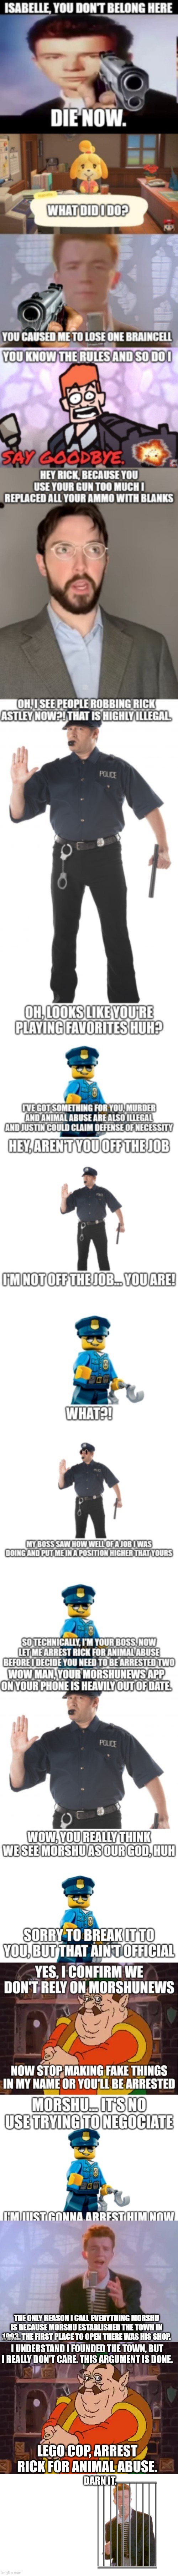 Lego Cop Helps Morshu, and Rick gets Arrested! | I UNDERSTAND I FOUNDED THE TOWN, BUT I REALLY DON'T CARE. THIS ARGUMENT IS DONE. LEGO COP, ARREST RICK FOR ANIMAL ABUSE. DARN IT. | made w/ Imgflip meme maker